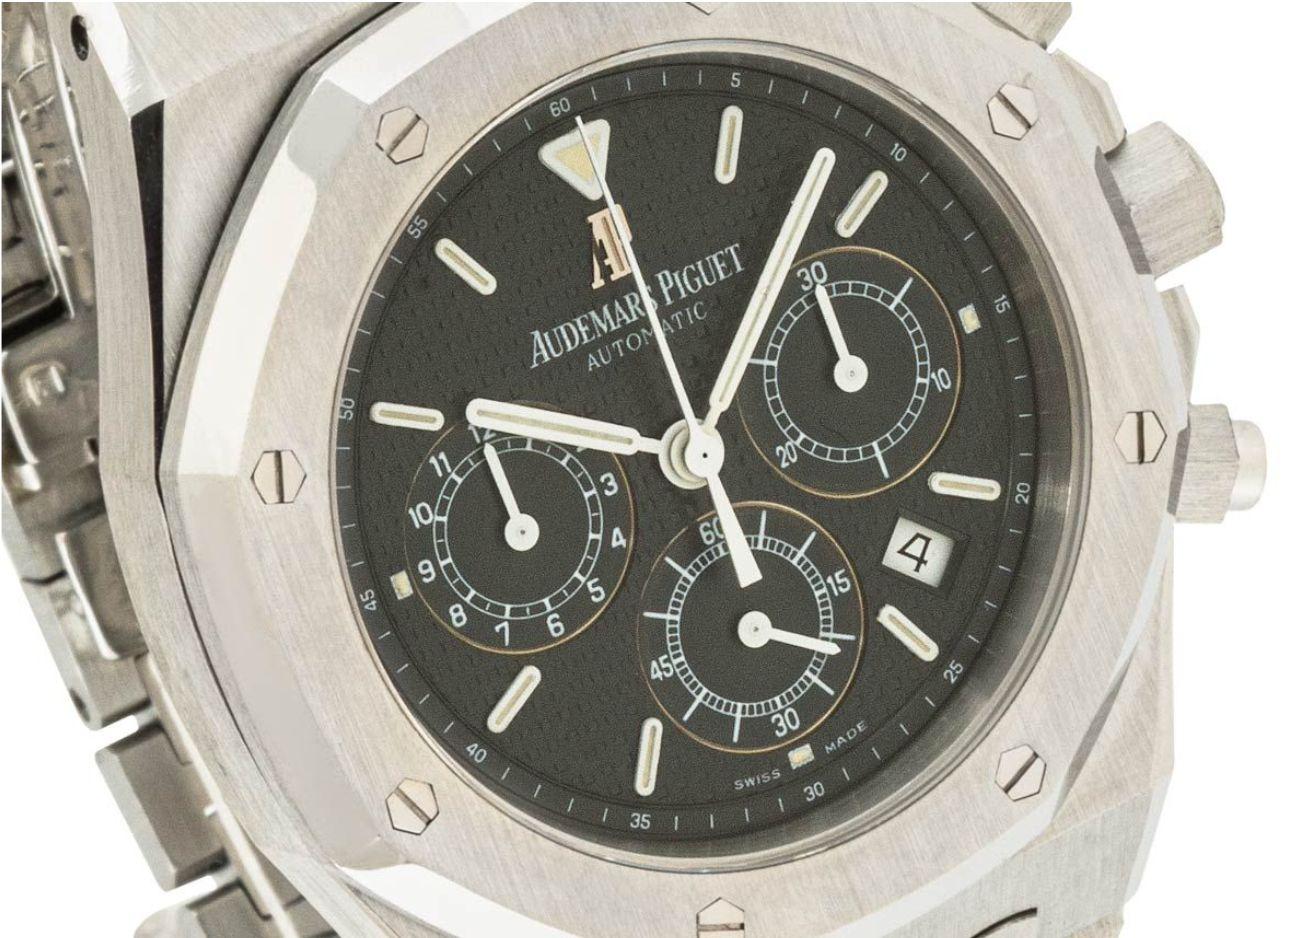 Audemars Piguet Royal Oak Chronograph 25860ST.OO.1110ST.01 In Excellent Condition For Sale In London, GB